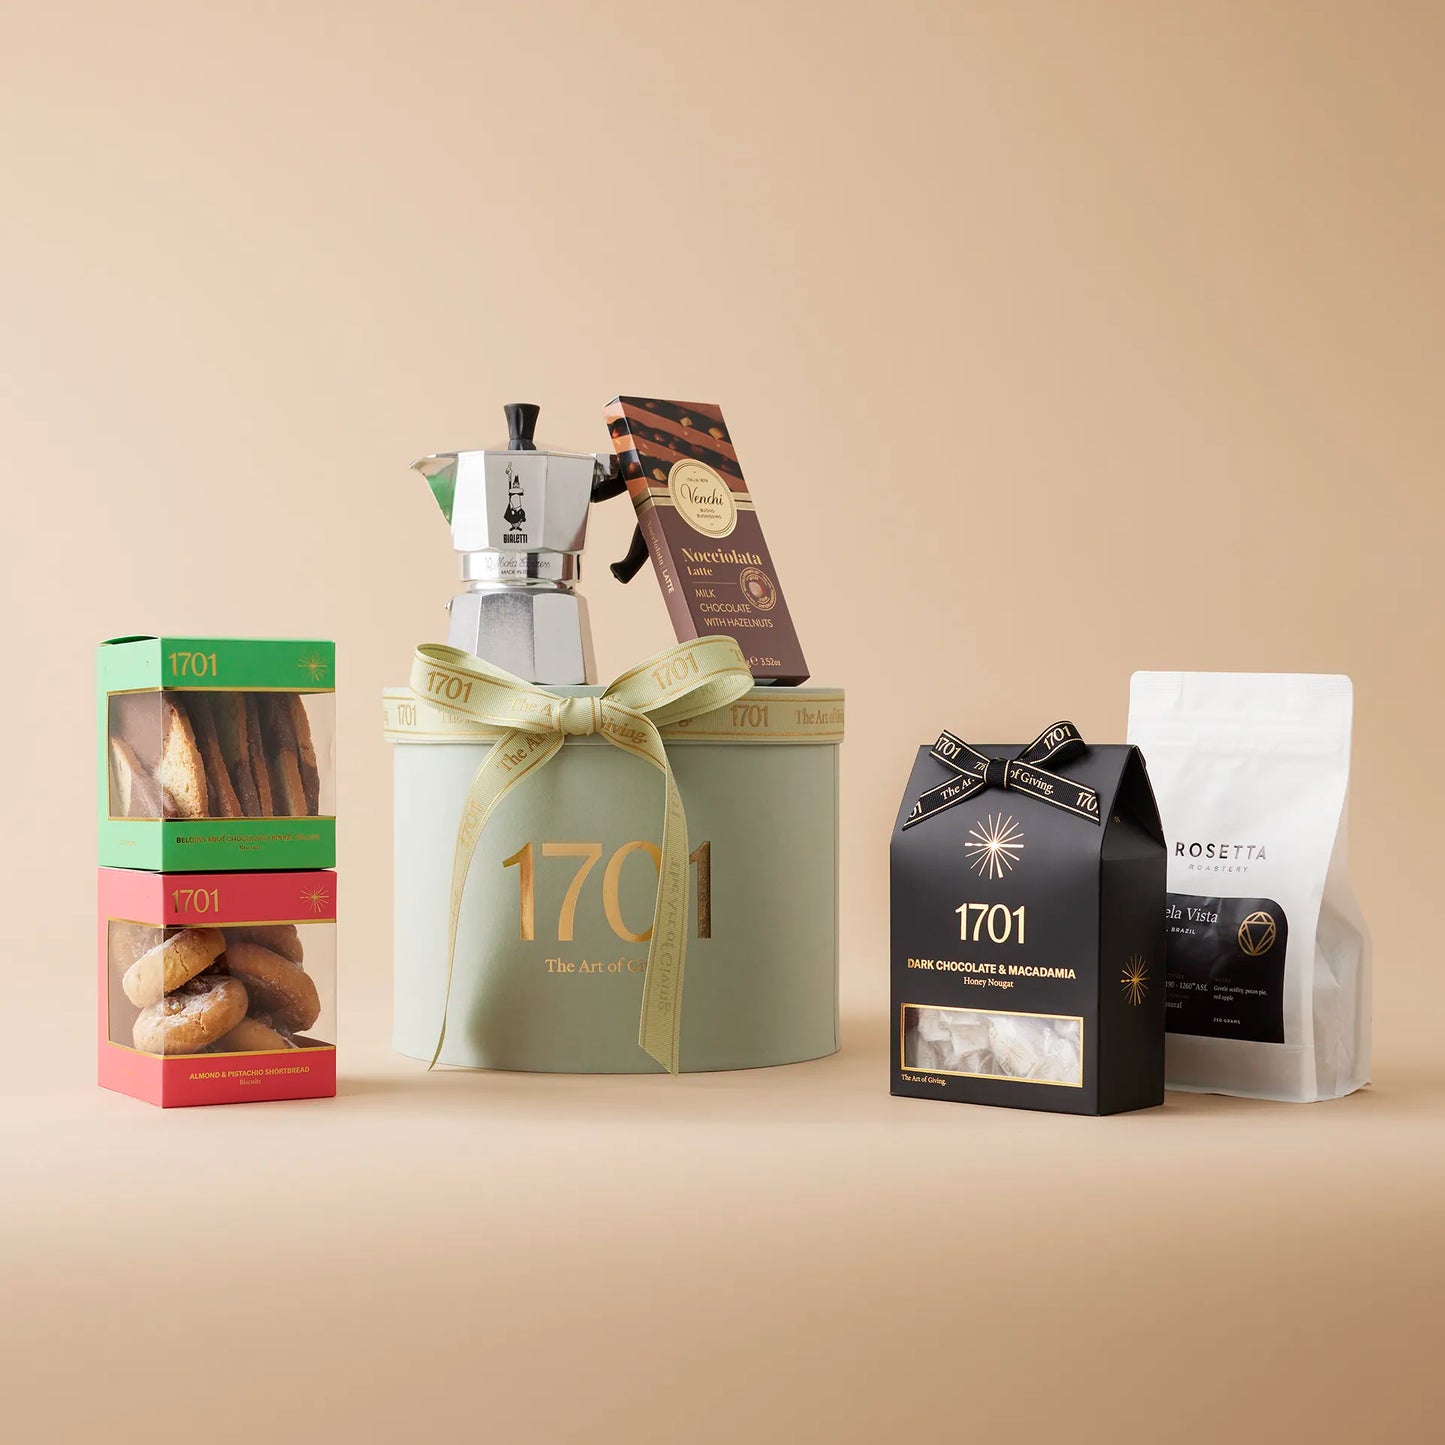 "Always Time for Coffee" gift box containing a handpicked selection of gourmet treats, including handcrafted honey nougat, a selection of biscuits, imported Italian chocolate, a Moka pot, and a bag of Rosetta Roastery coffee. The gift box is shown on a warm background, with the product label visible on the front of the box. The gift box is tied with a ribbon, and a gift tag is visible on the top of the box. This gift is perfect for coffee lovers and is suitable for any occasion.